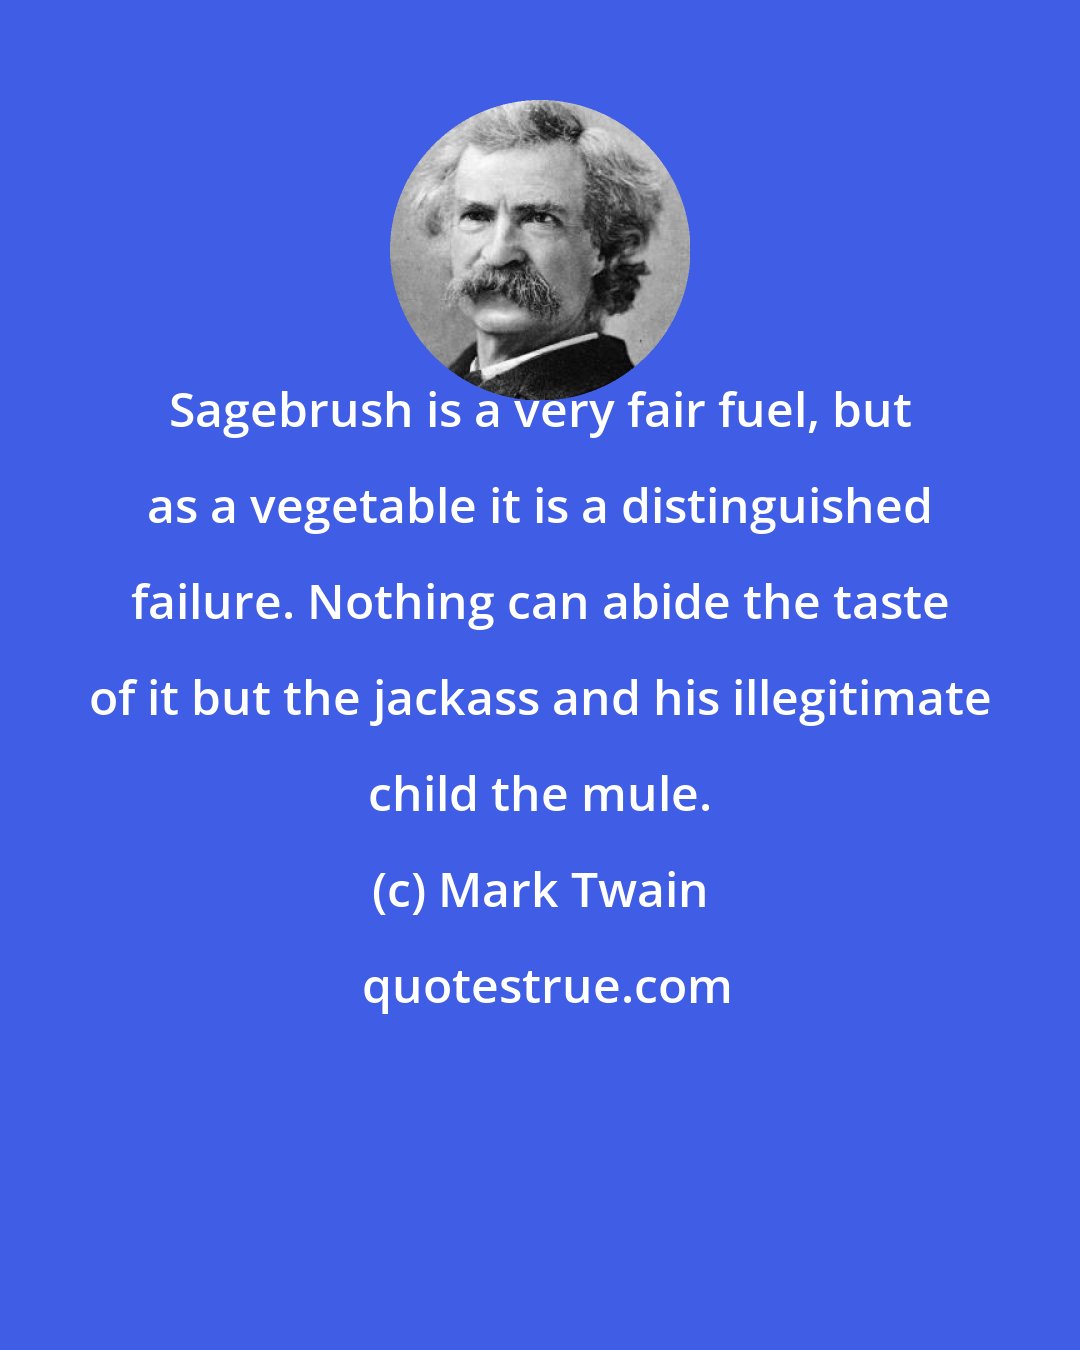 Mark Twain: Sagebrush is a very fair fuel, but as a vegetable it is a distinguished failure. Nothing can abide the taste of it but the jackass and his illegitimate child the mule.